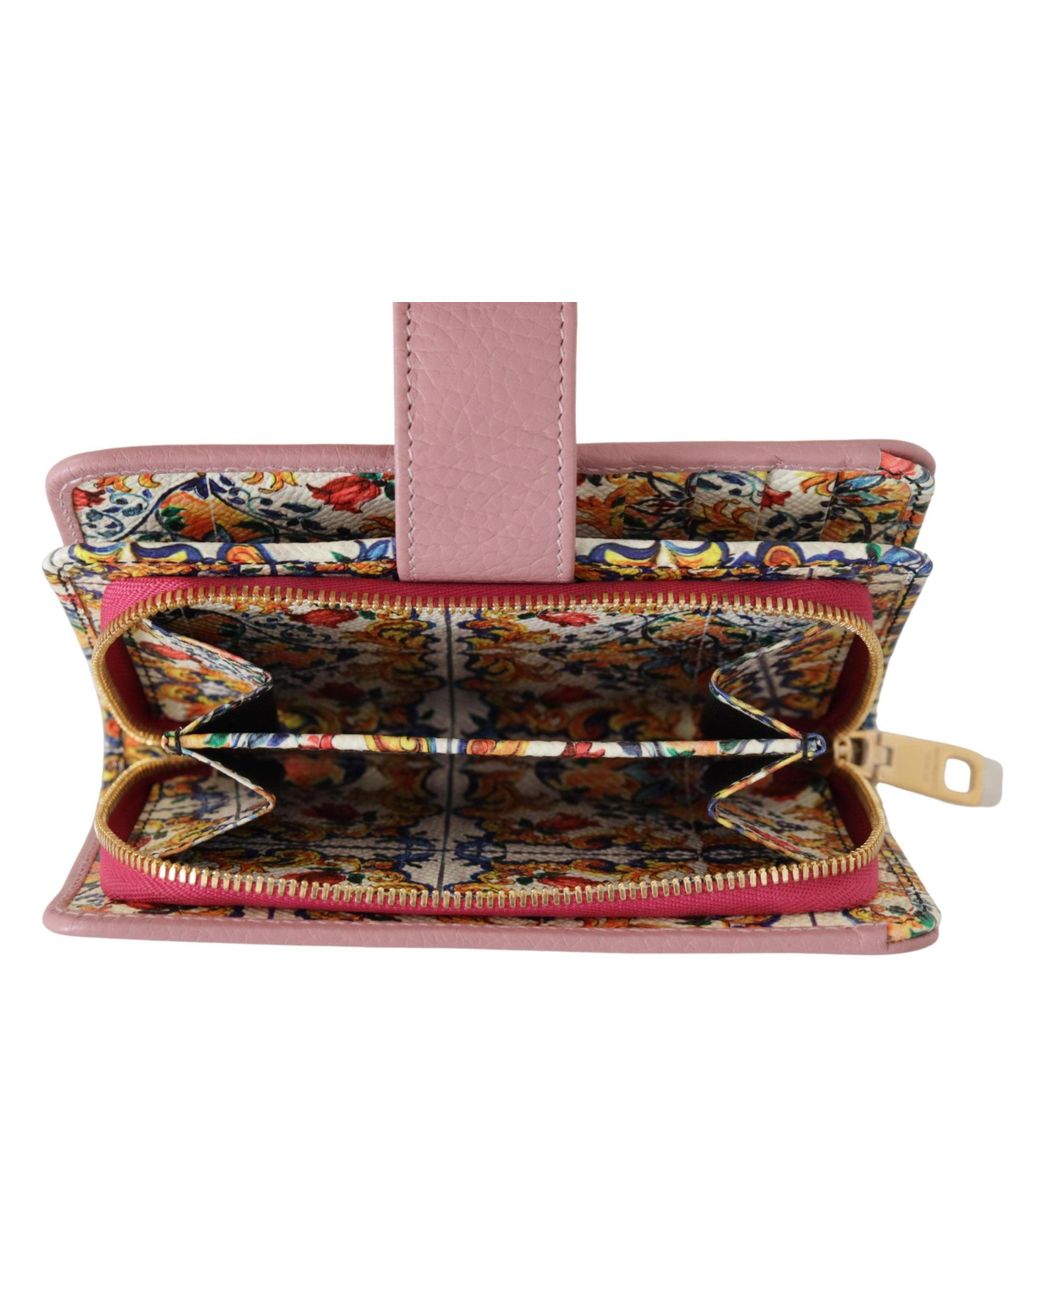 Dolce & Gabbana Multicolor Floral Leather Bifold Continental